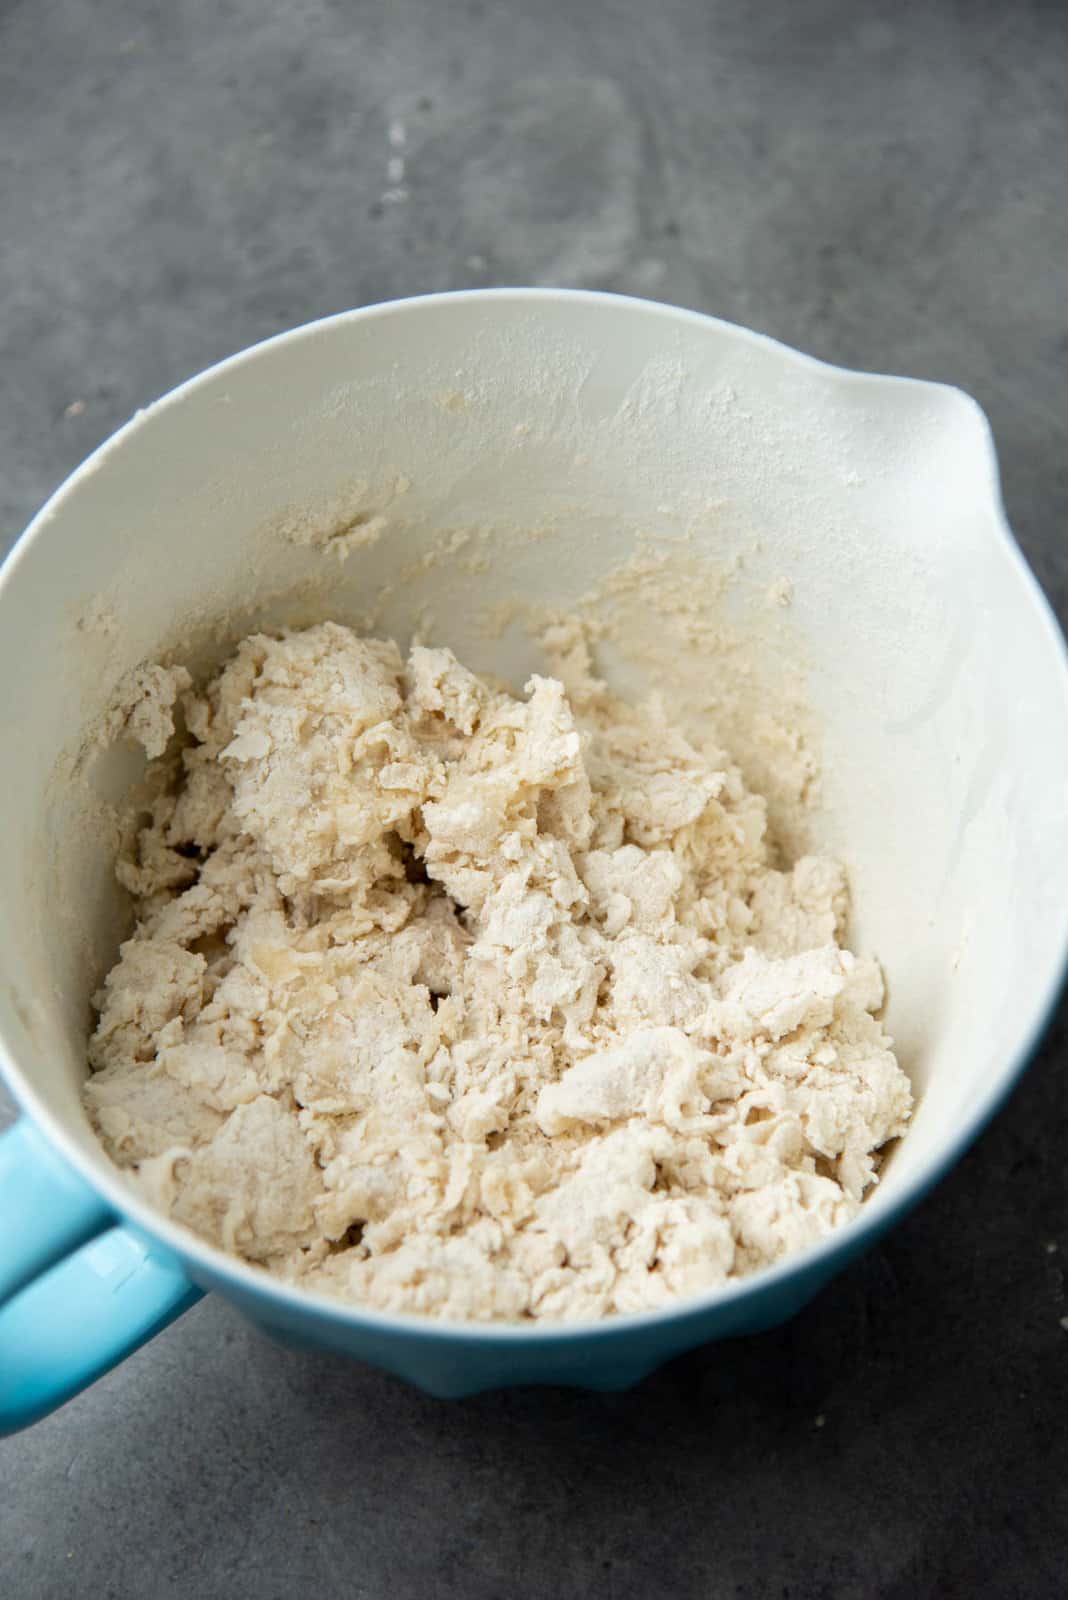 Flour clumps in a bowl, while being mixed with water to form a dough.